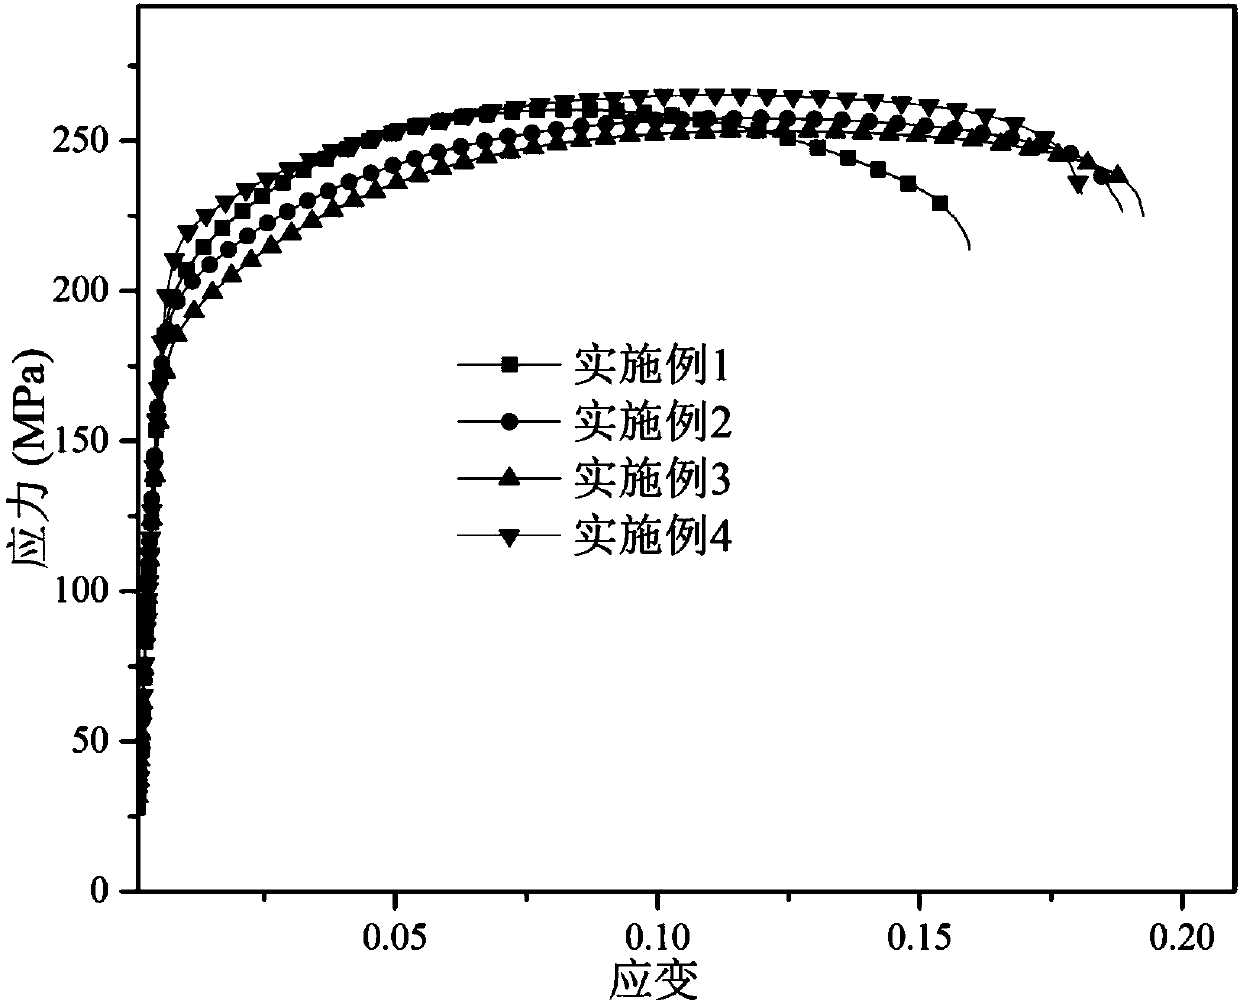 Degradable biomedical Mg-Zn-Zr-Nd alloy material and preparation method thereof